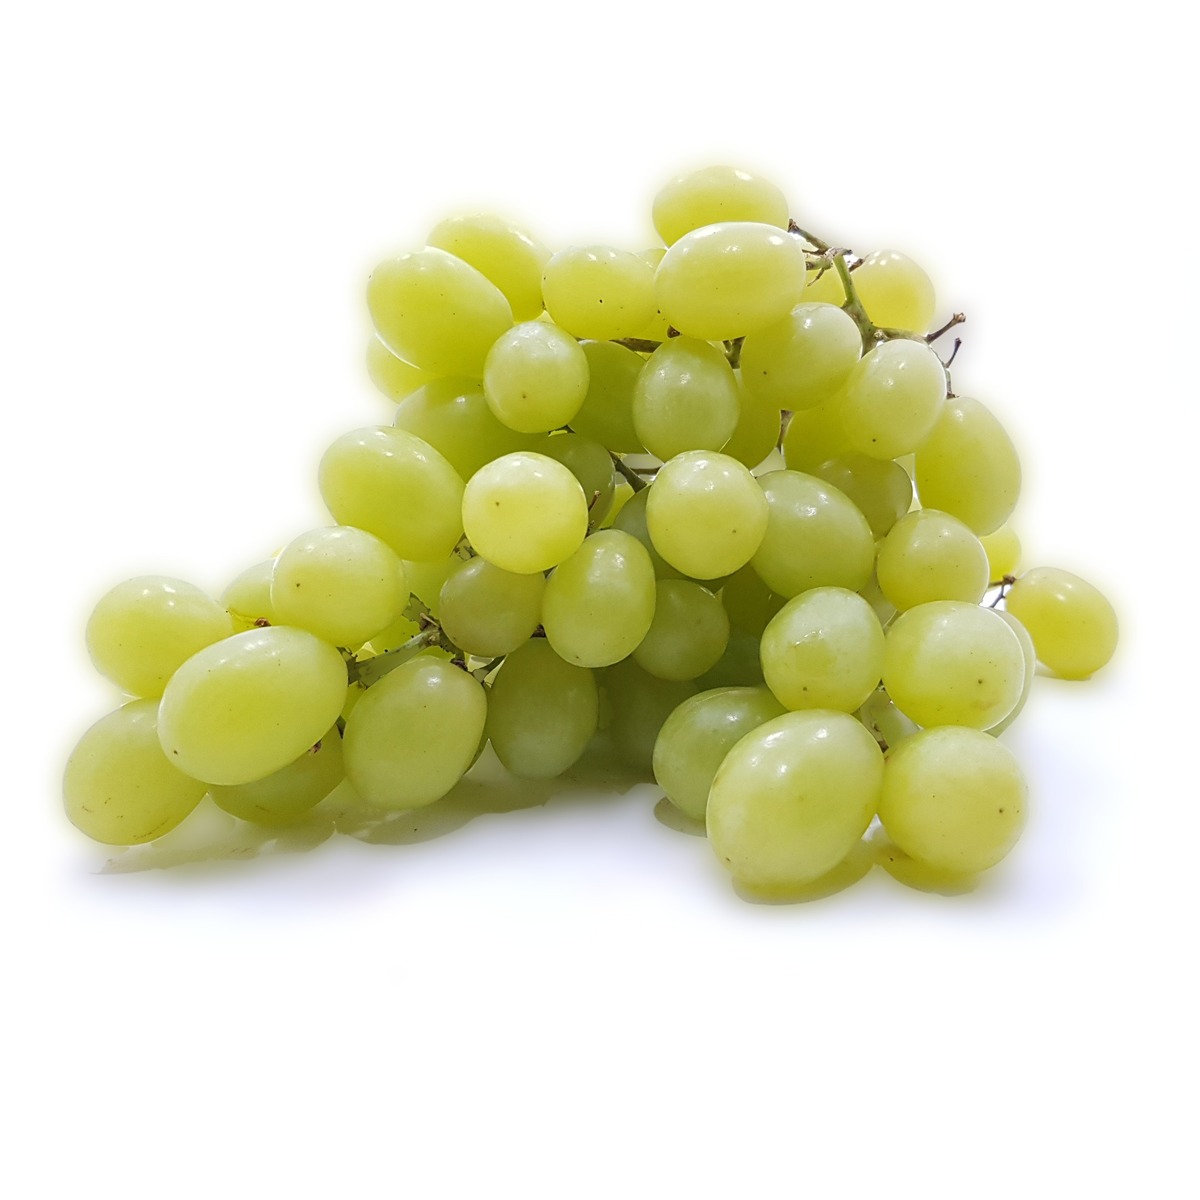 White Grapes South Africa 500 g